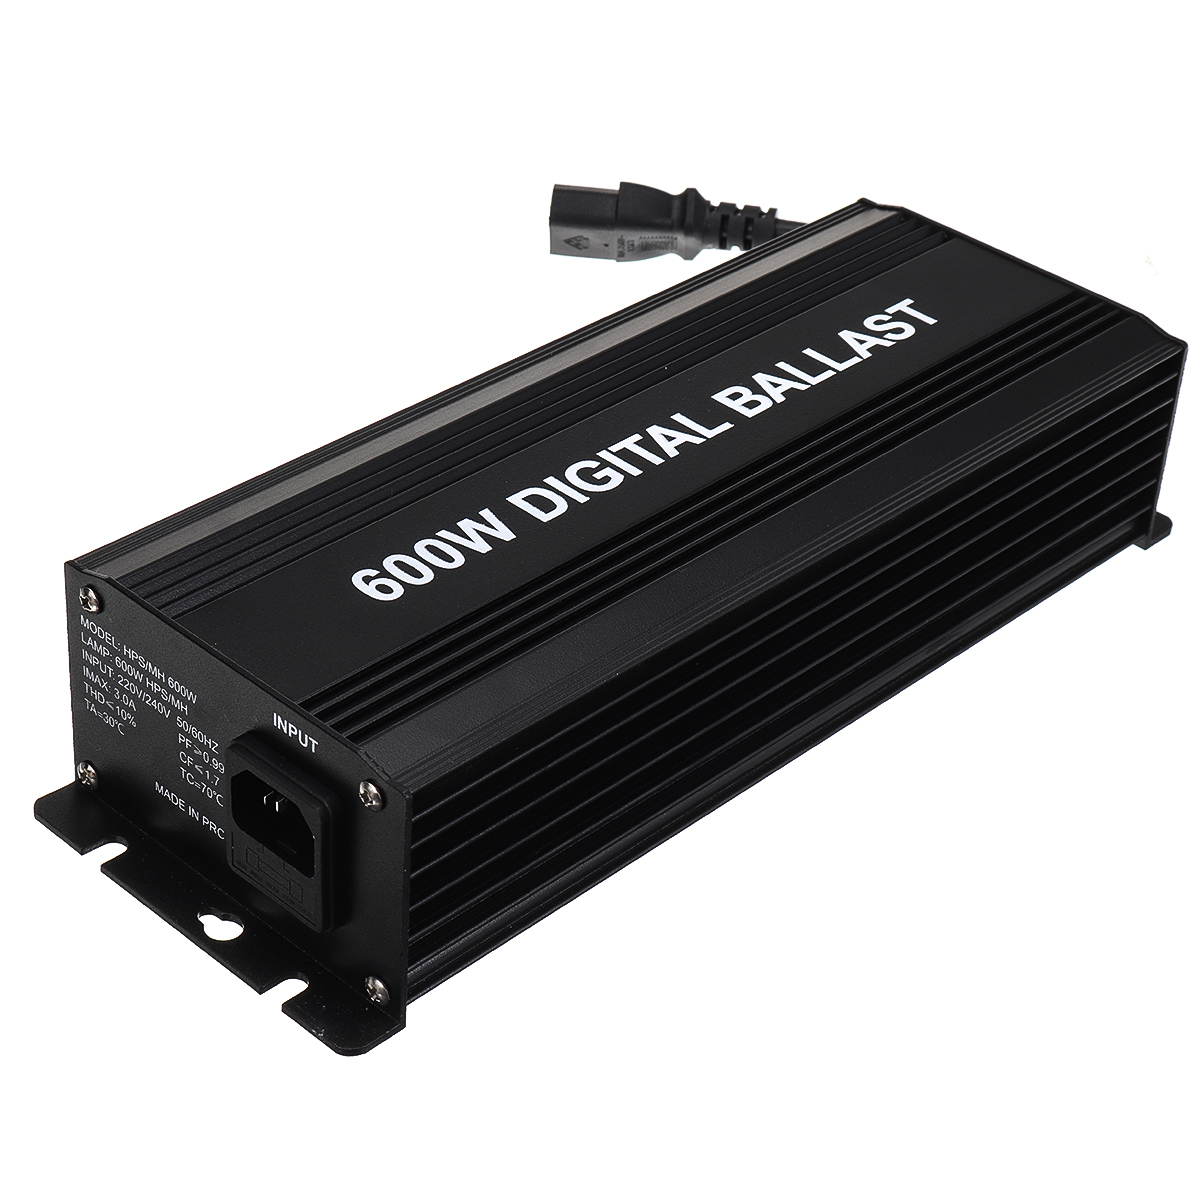 Find 600W Horticulture Electronic Dimmable Digital Grow Light Ballast MH HPS for Sale on Gipsybee.com with cryptocurrencies